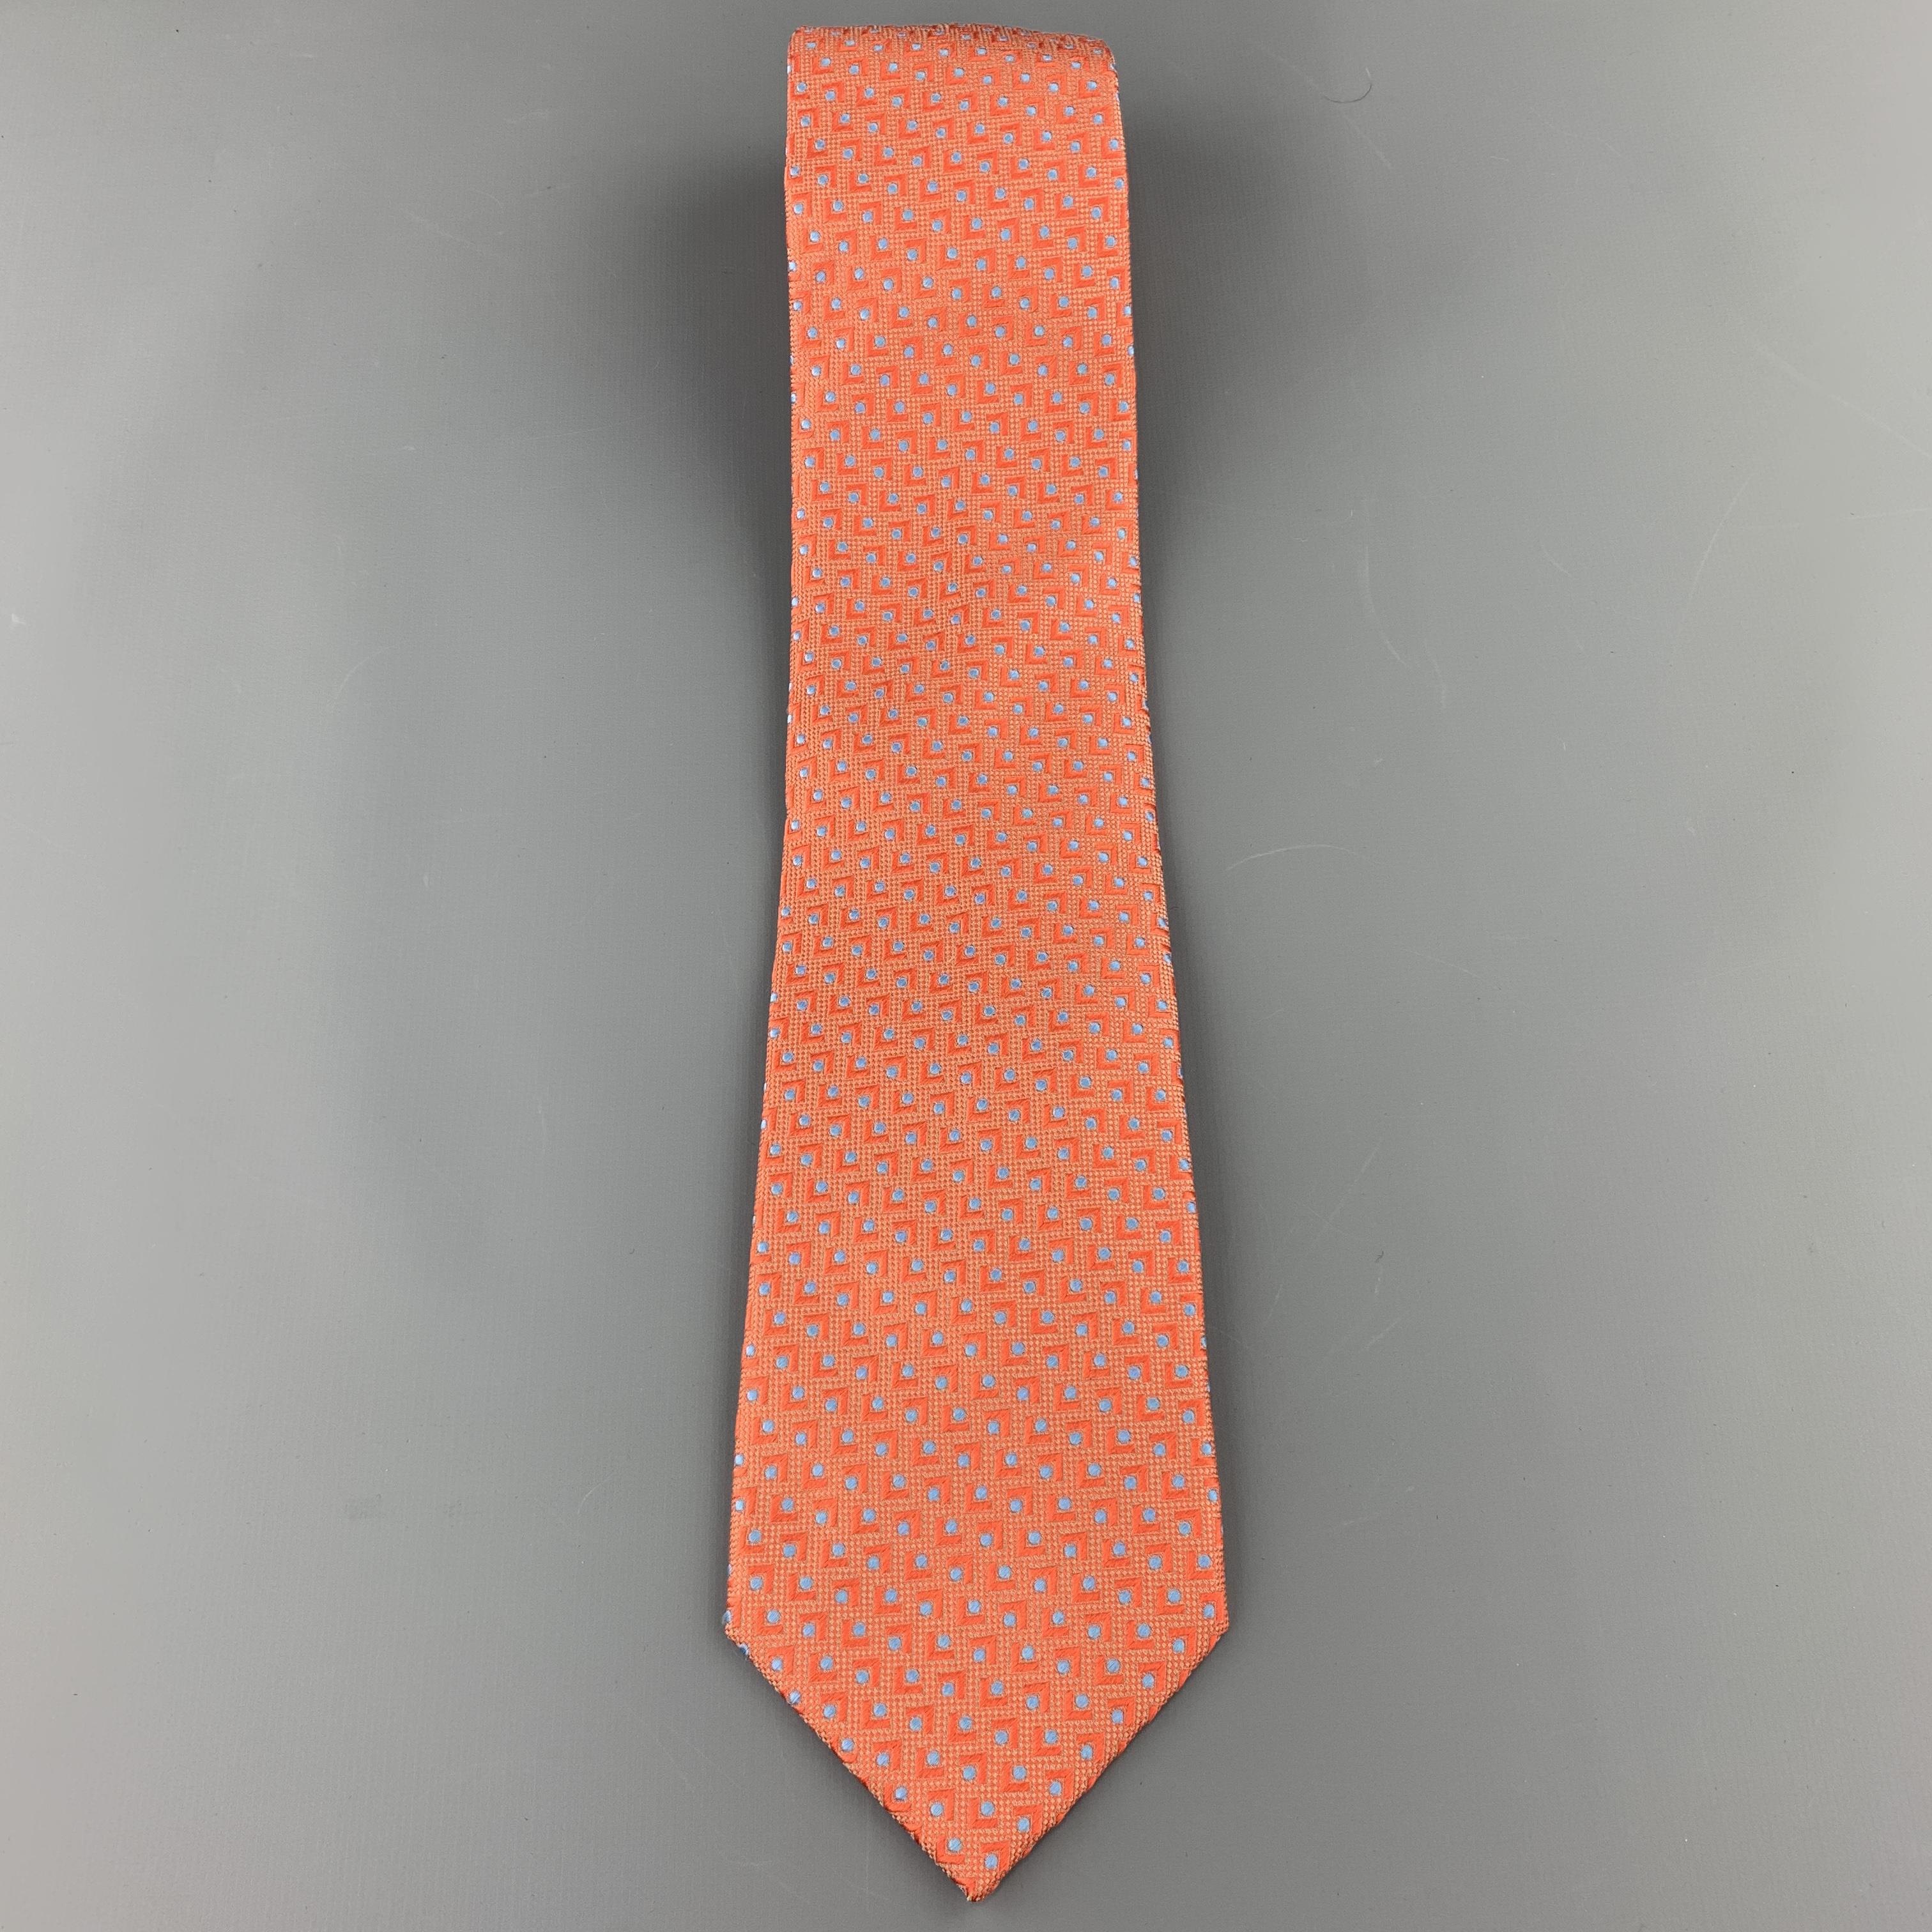 BRIONI necktie comes in orange textured woven silk with all over abstract geometric blue spot print. Made in Italy.

Excellent Pre-Owned Condition.

Width: 3.65 in.  